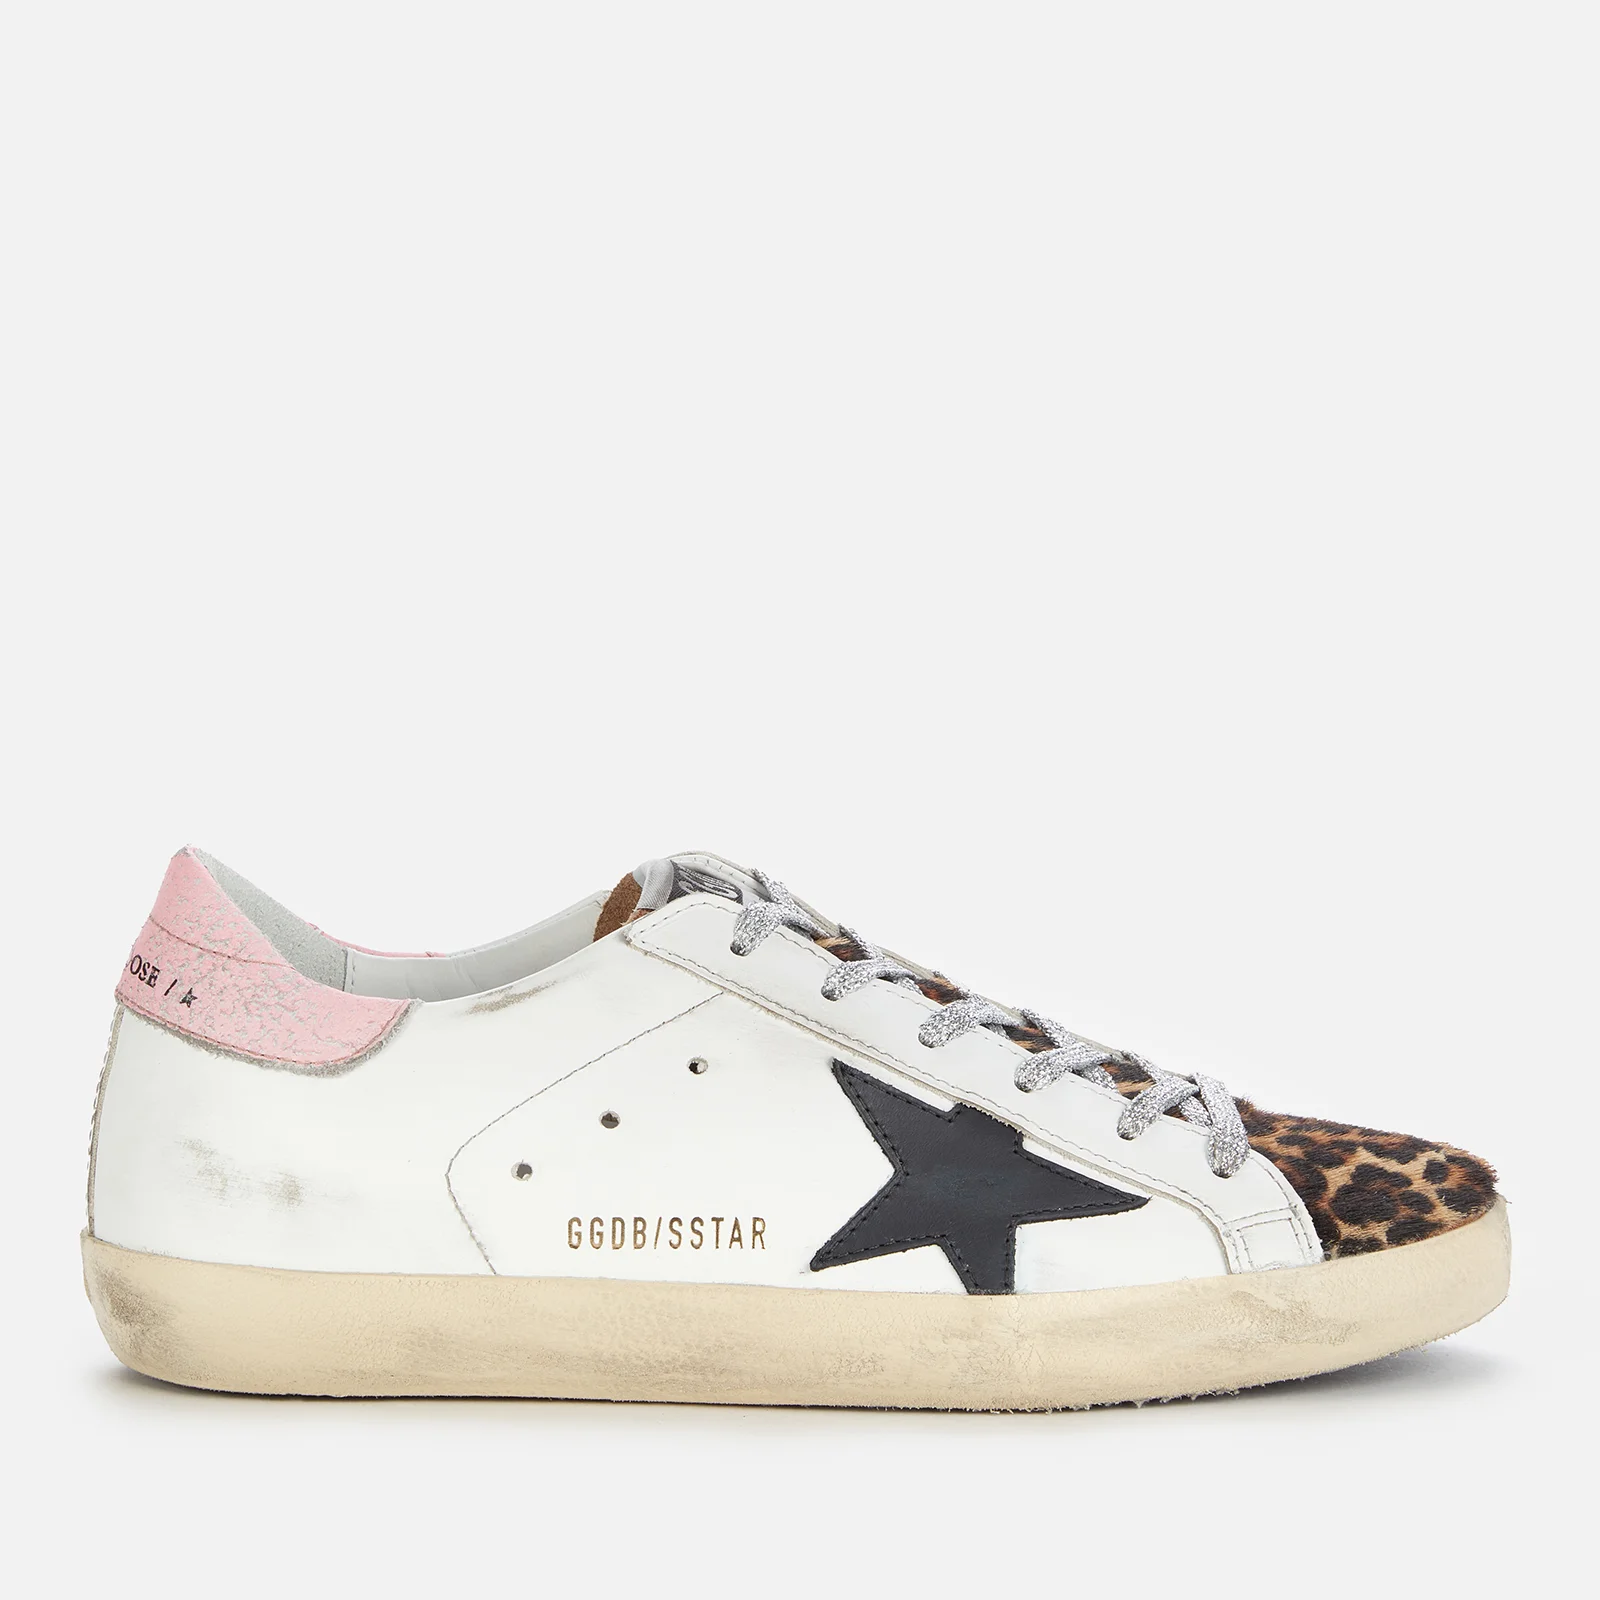 Golden Goose Women's Superstar Leather Trainers - White/Beige/Brown/Leopard Image 1